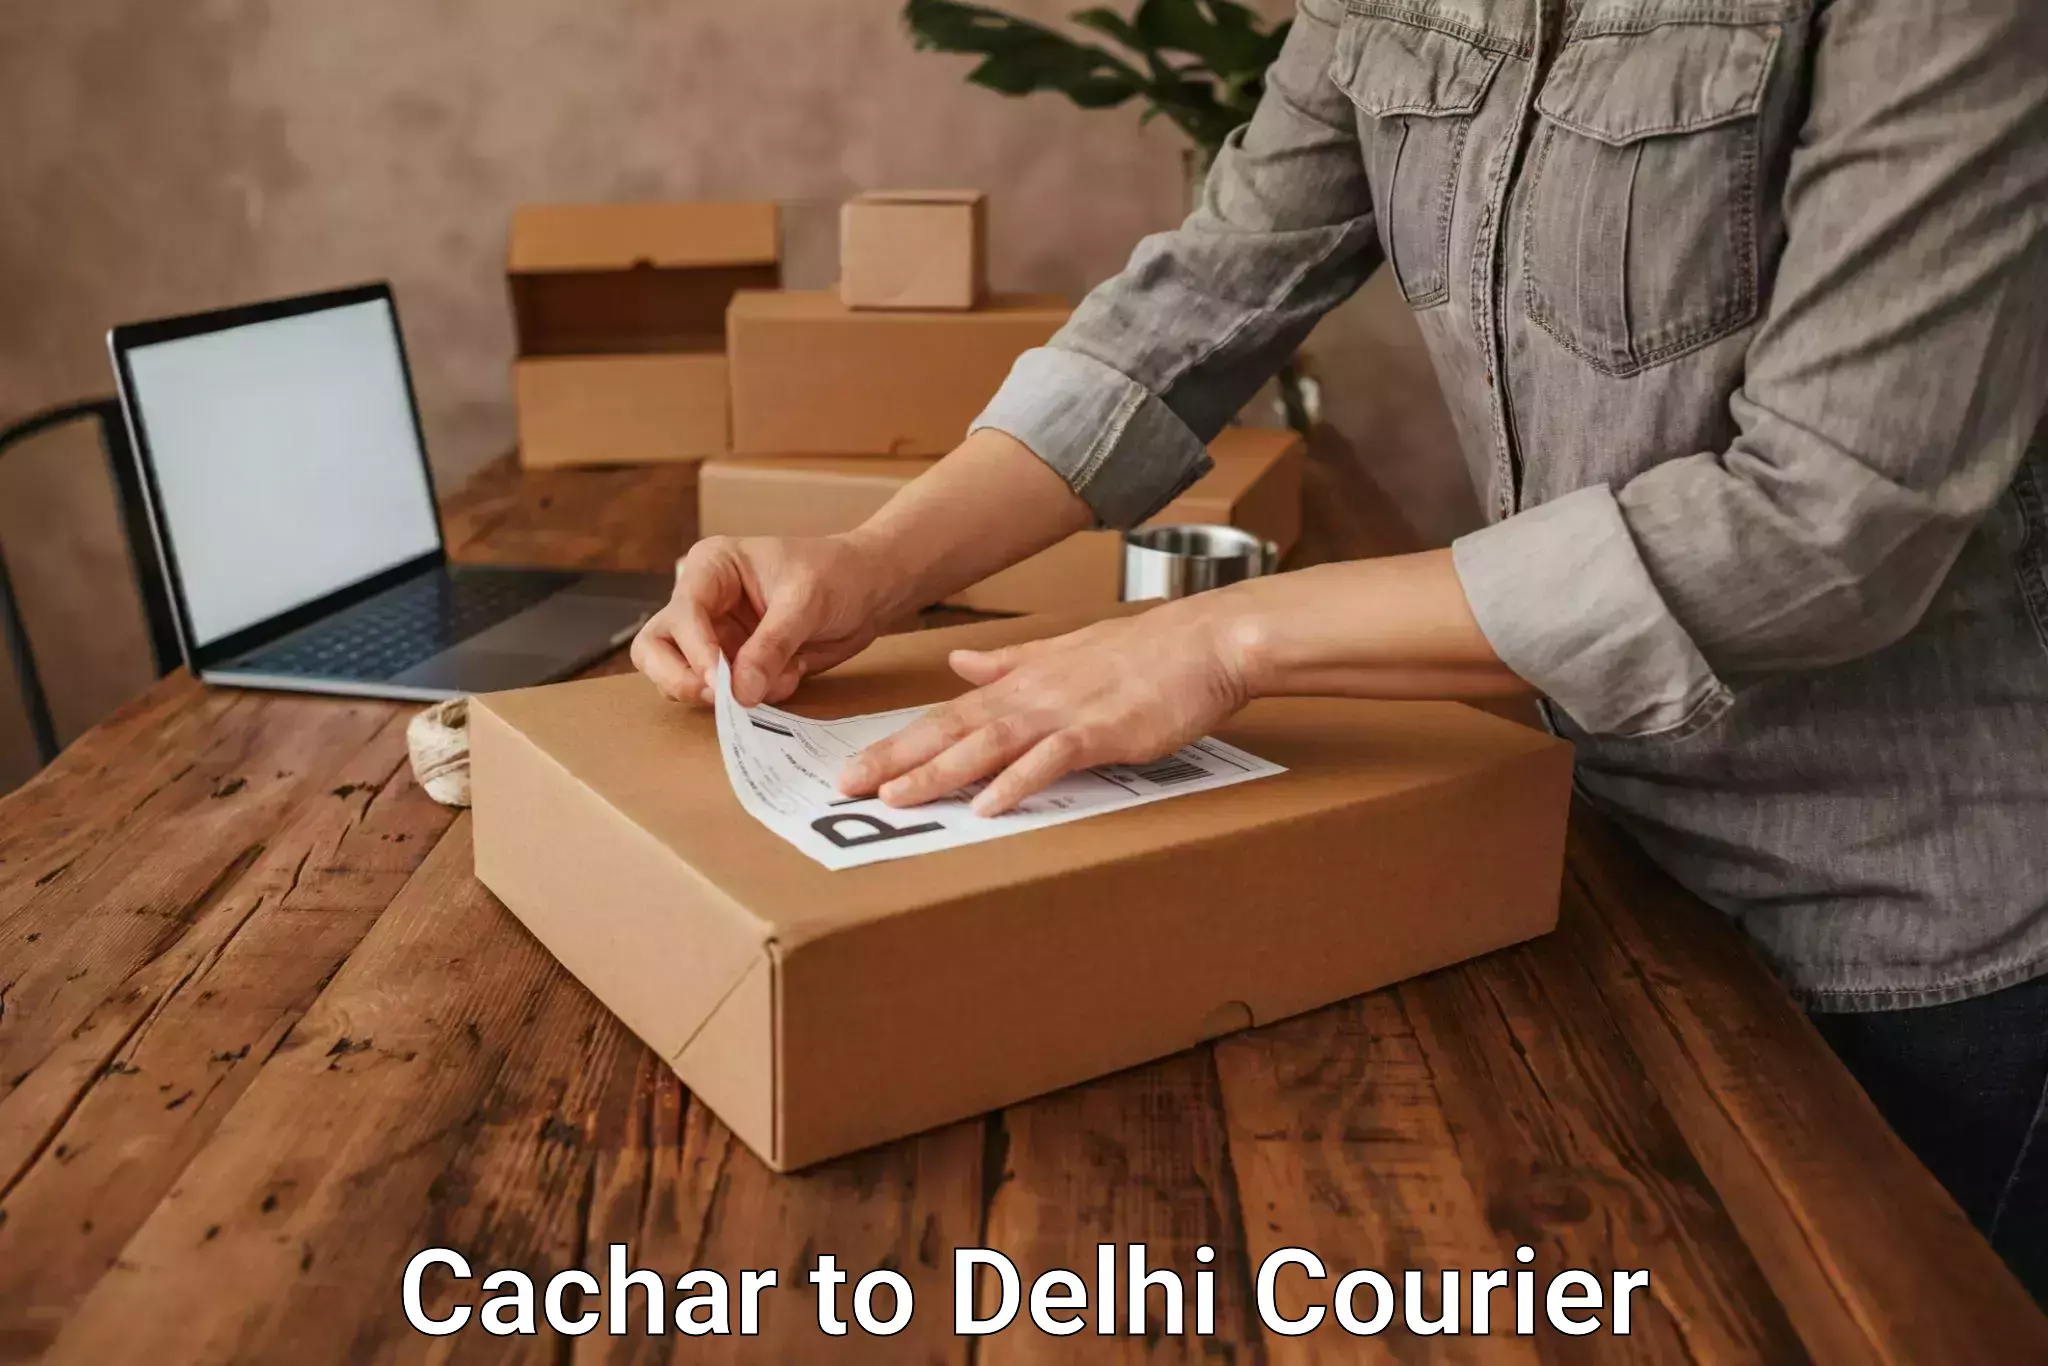 High-priority parcel service Cachar to NCR